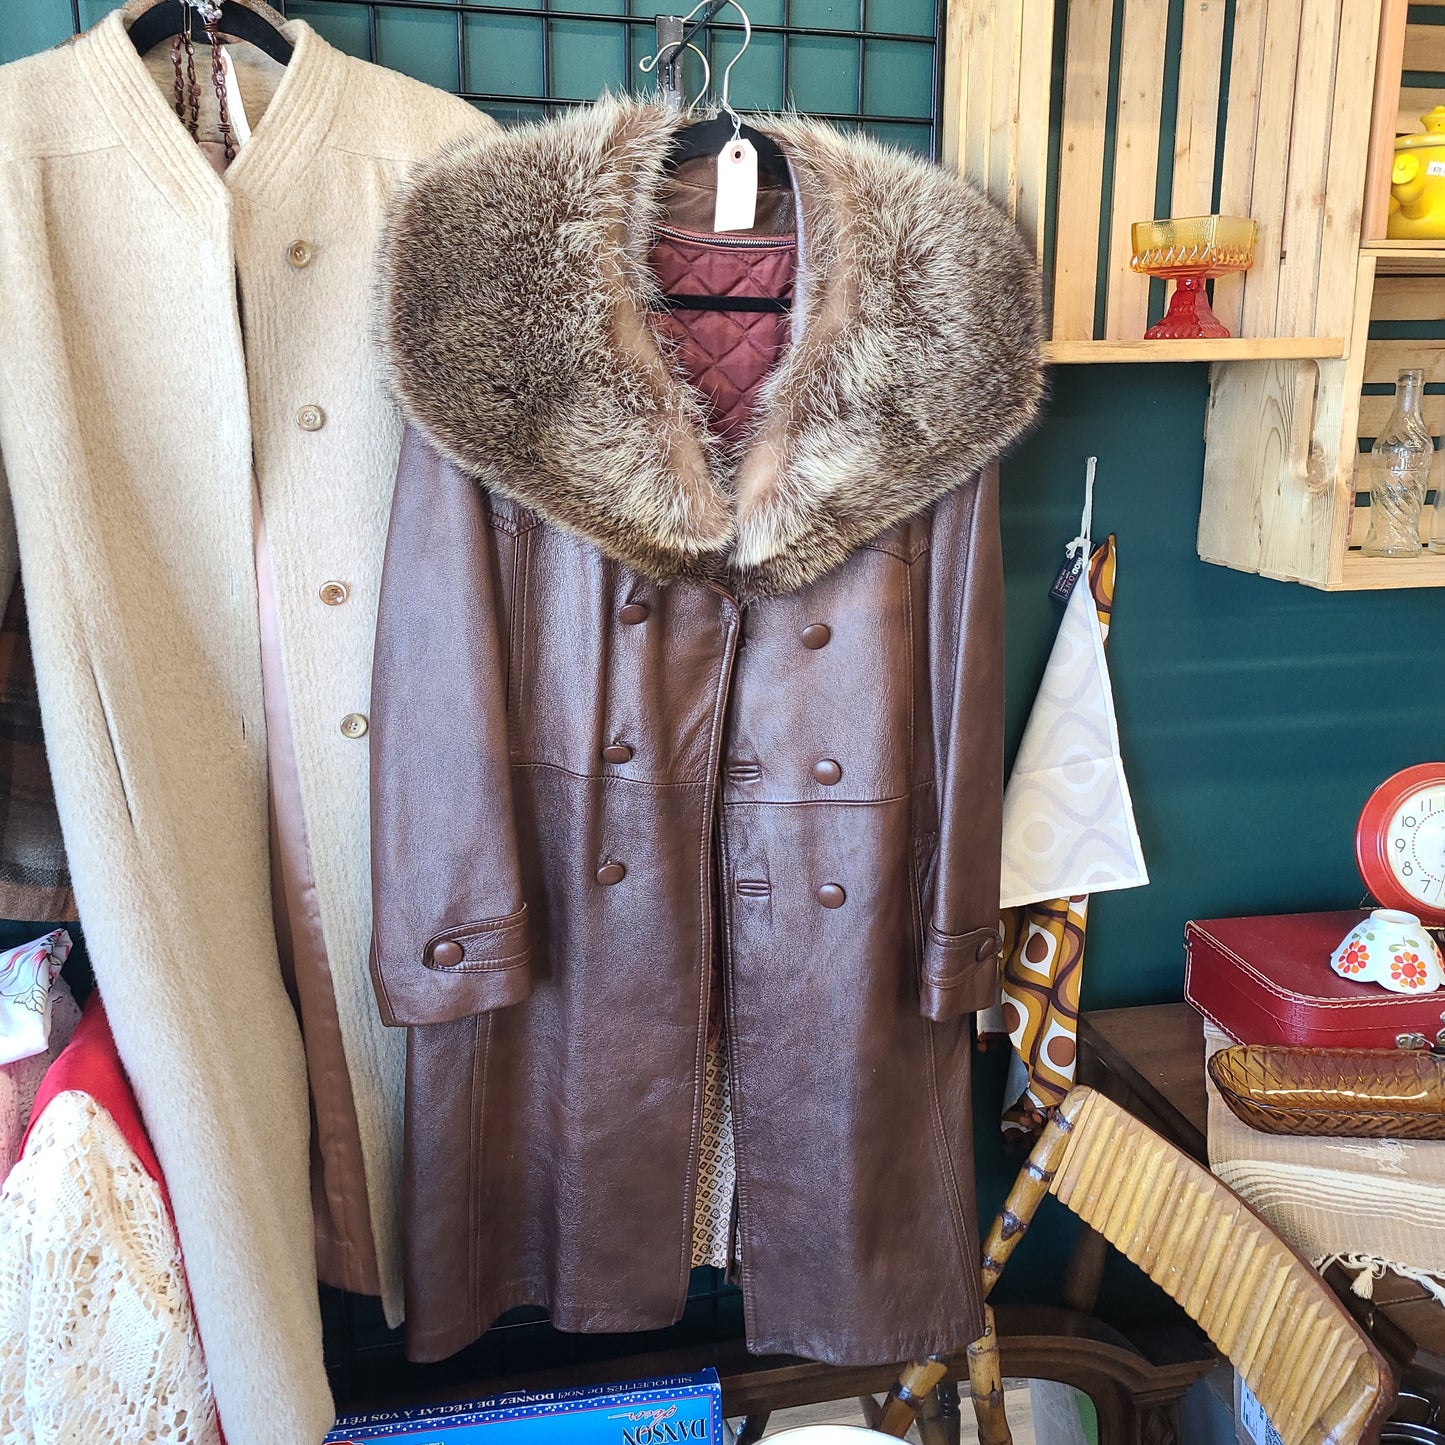 Vintage leather and fur - Classic & Kitsch